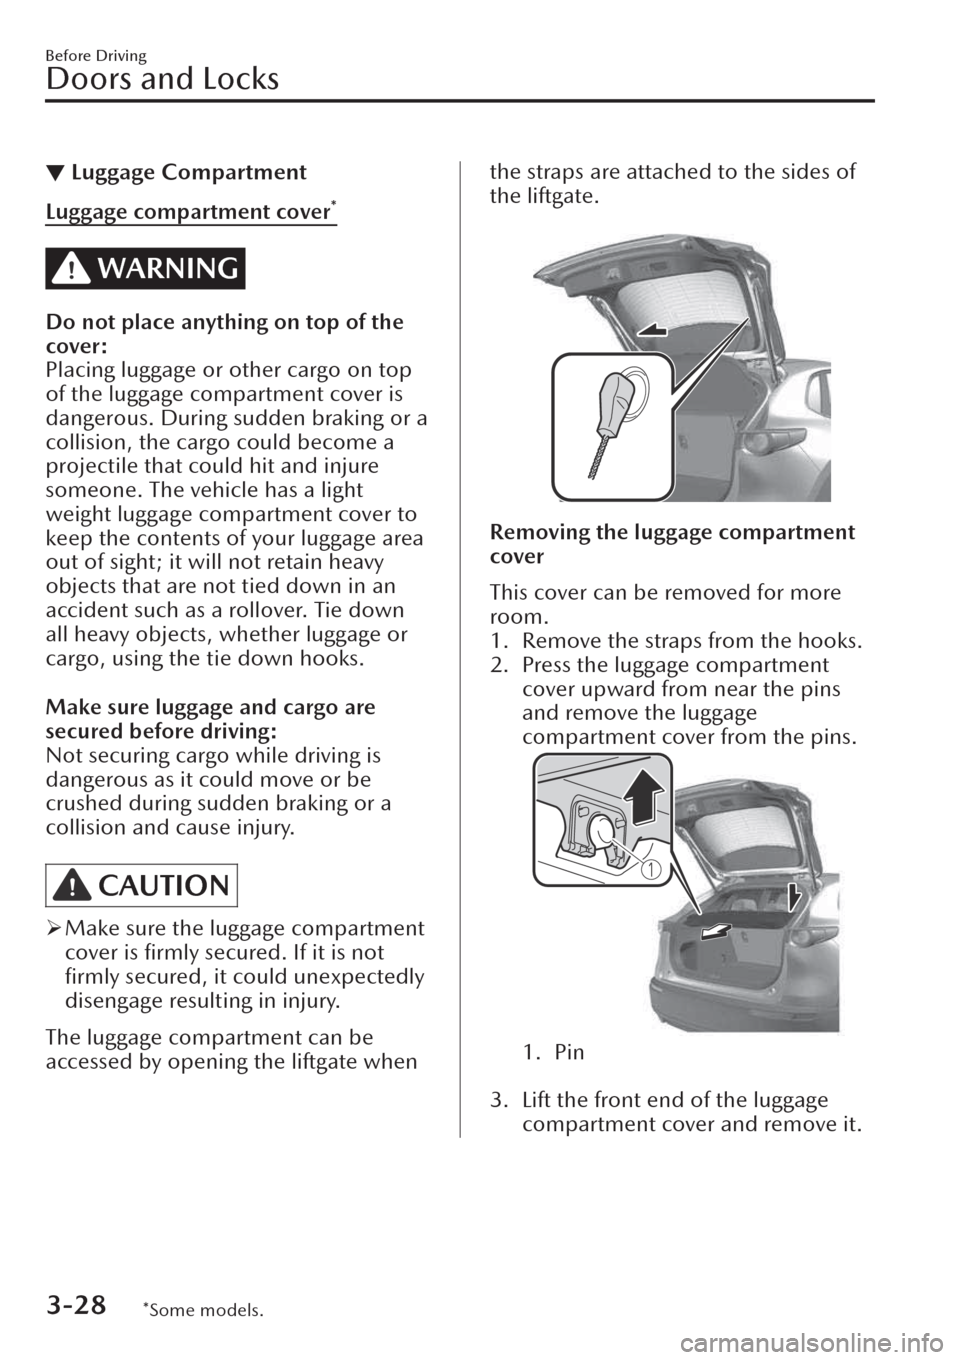 MAZDA MODEL CX-30 2019  Owners Manual (in English) ▼Luggage Compartment
Luggage compartment cover*
WARNING
Do not place anything on top of the
cover:
Placing luggage or other cargo on top
of the luggage compartment cover is
dangerous. During sudden 